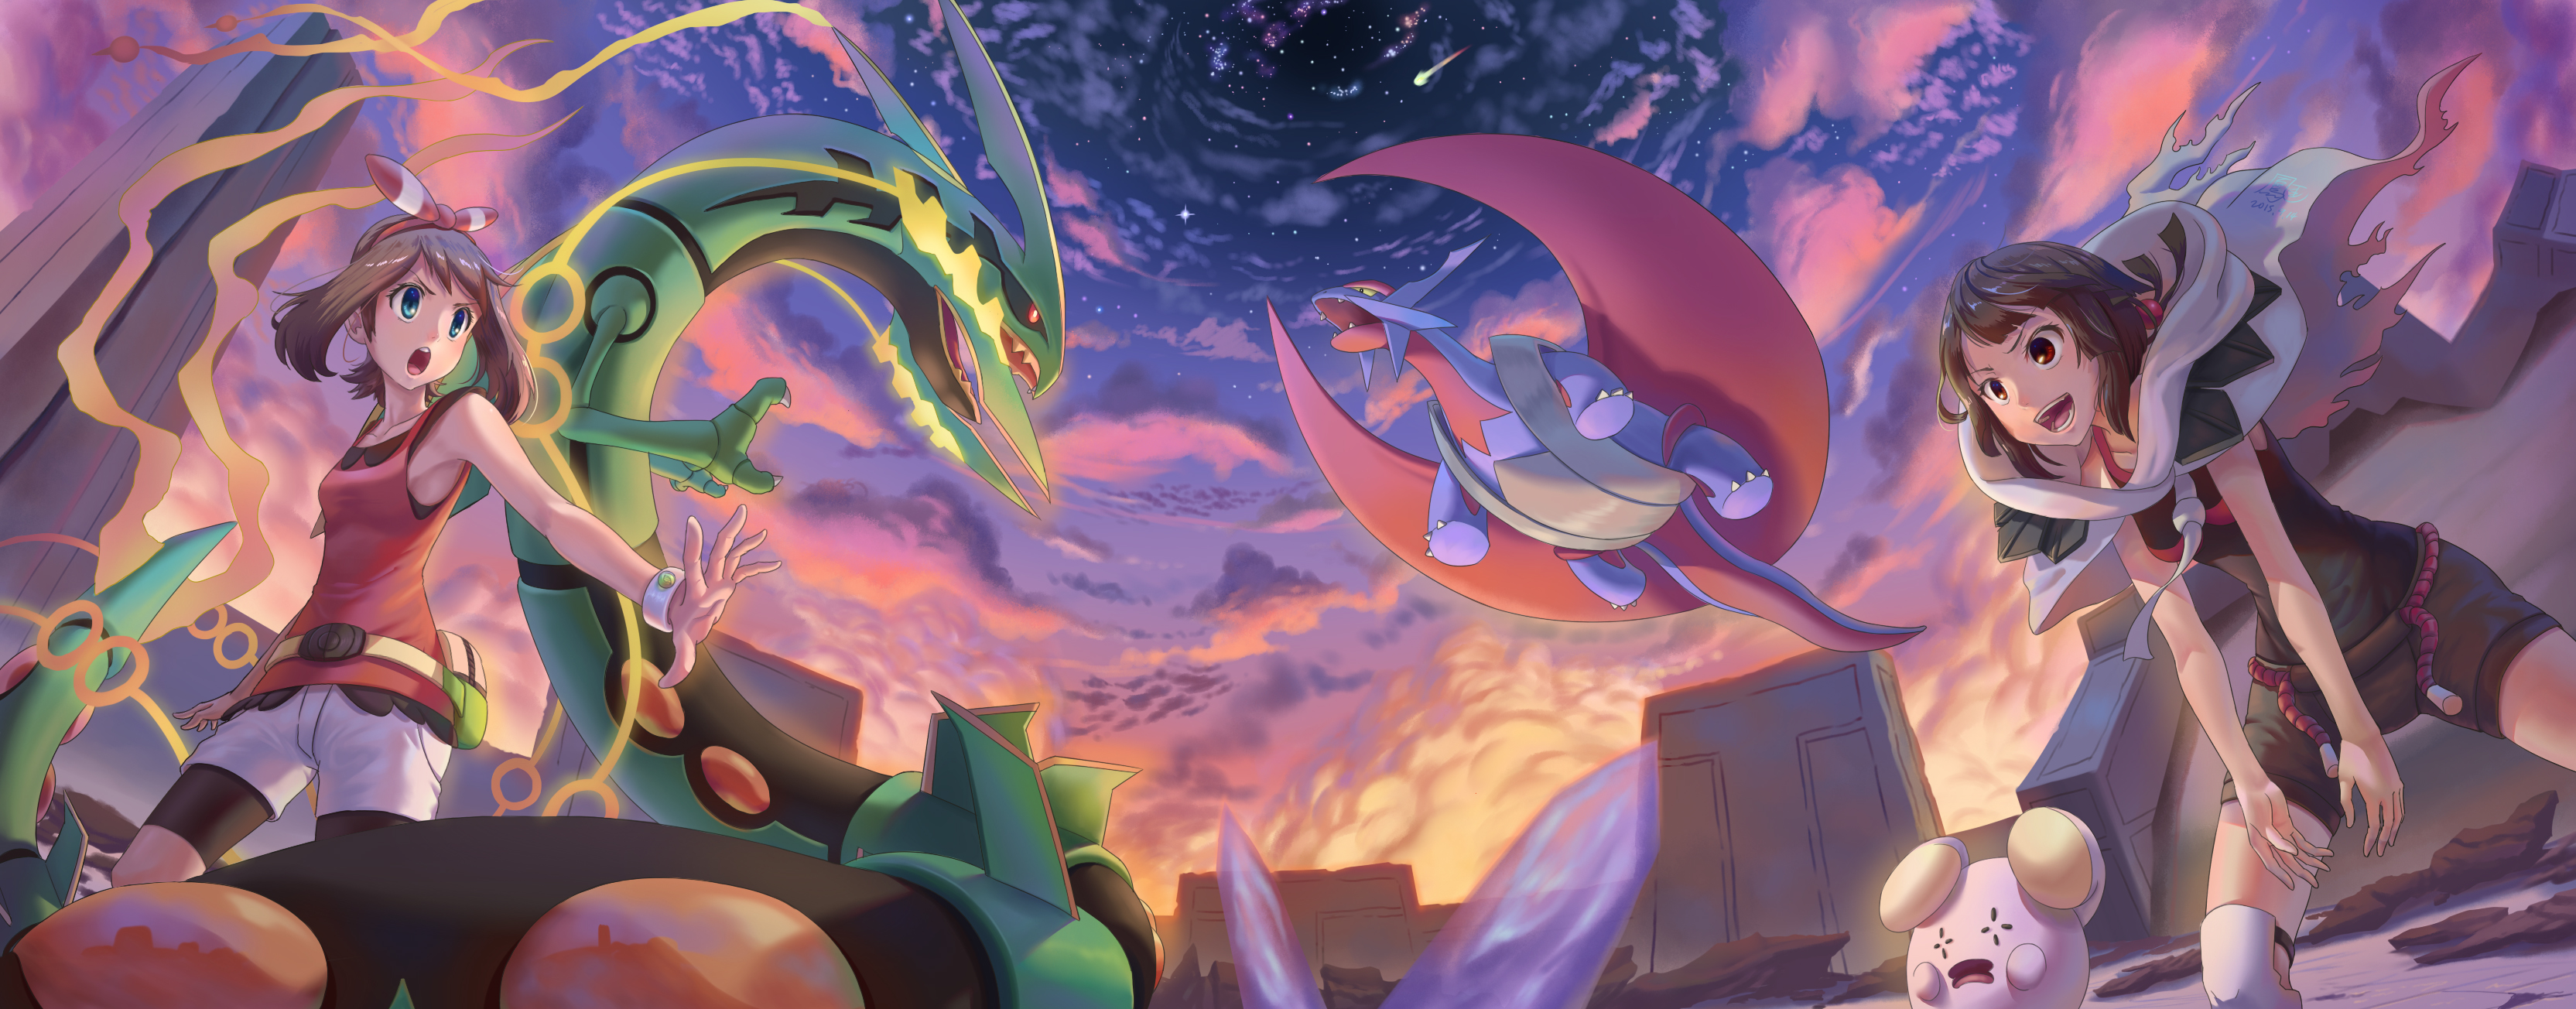 Free Download Omega Ruby And Alpha Sapphire Images Pokemon Oras Welcome Back X For Your